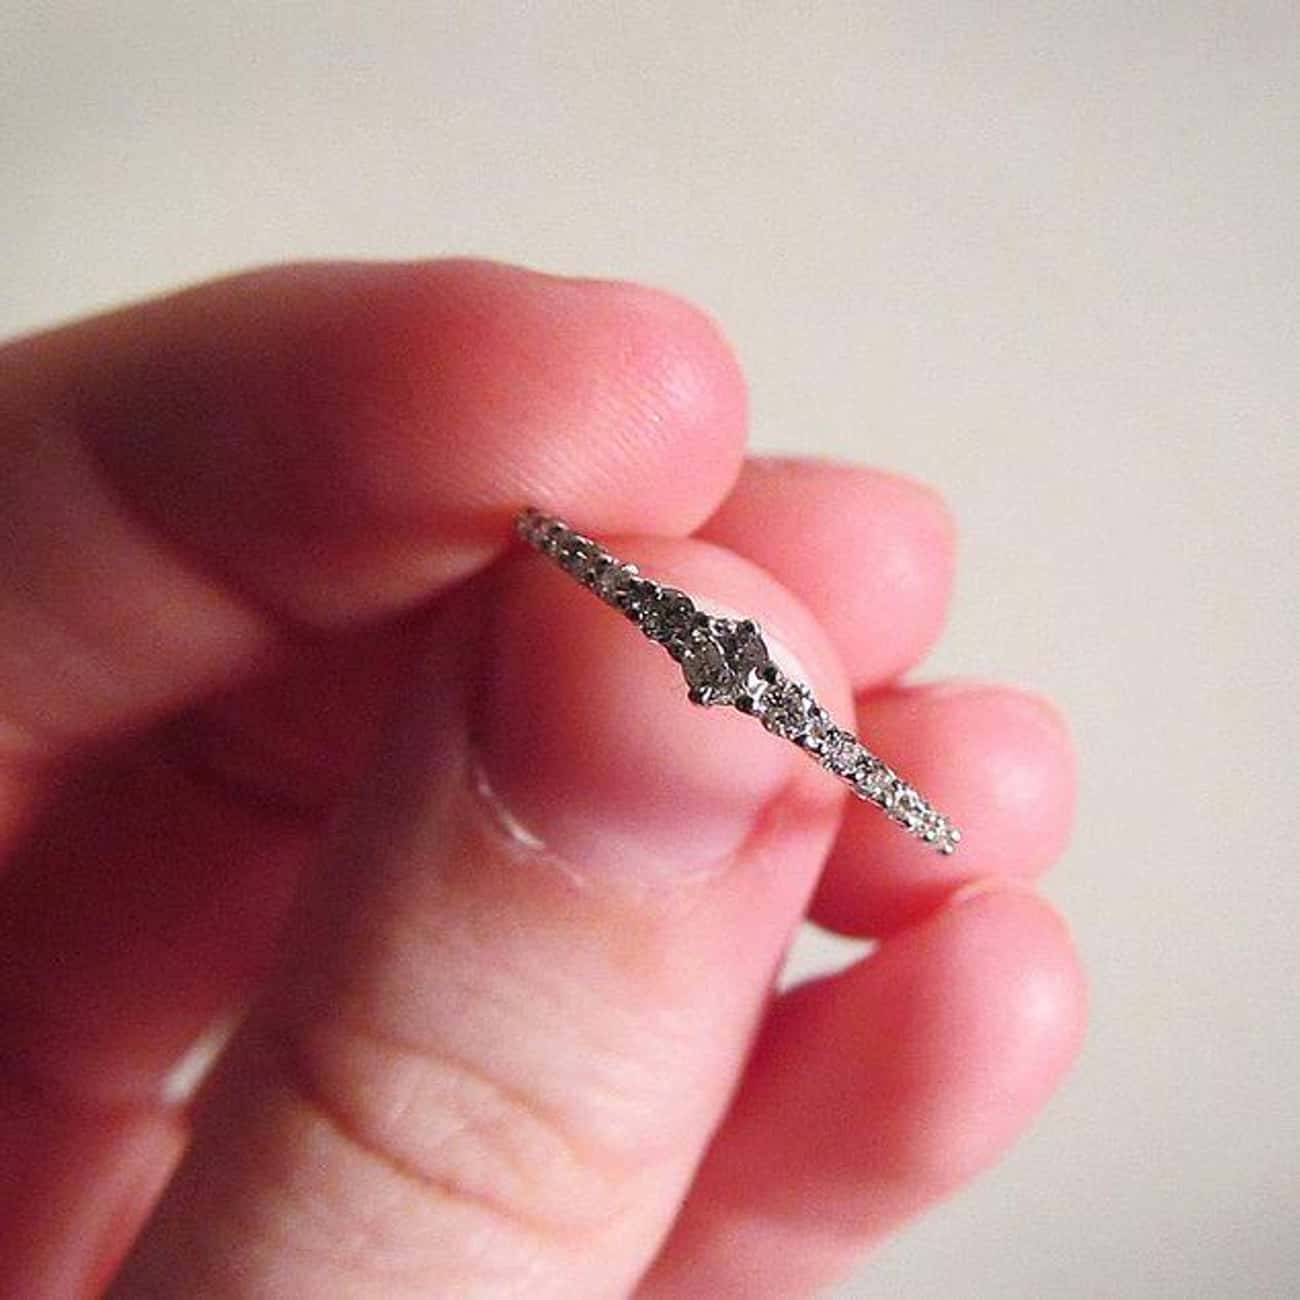 Don't Let Friends Try on Your Engagement Ring